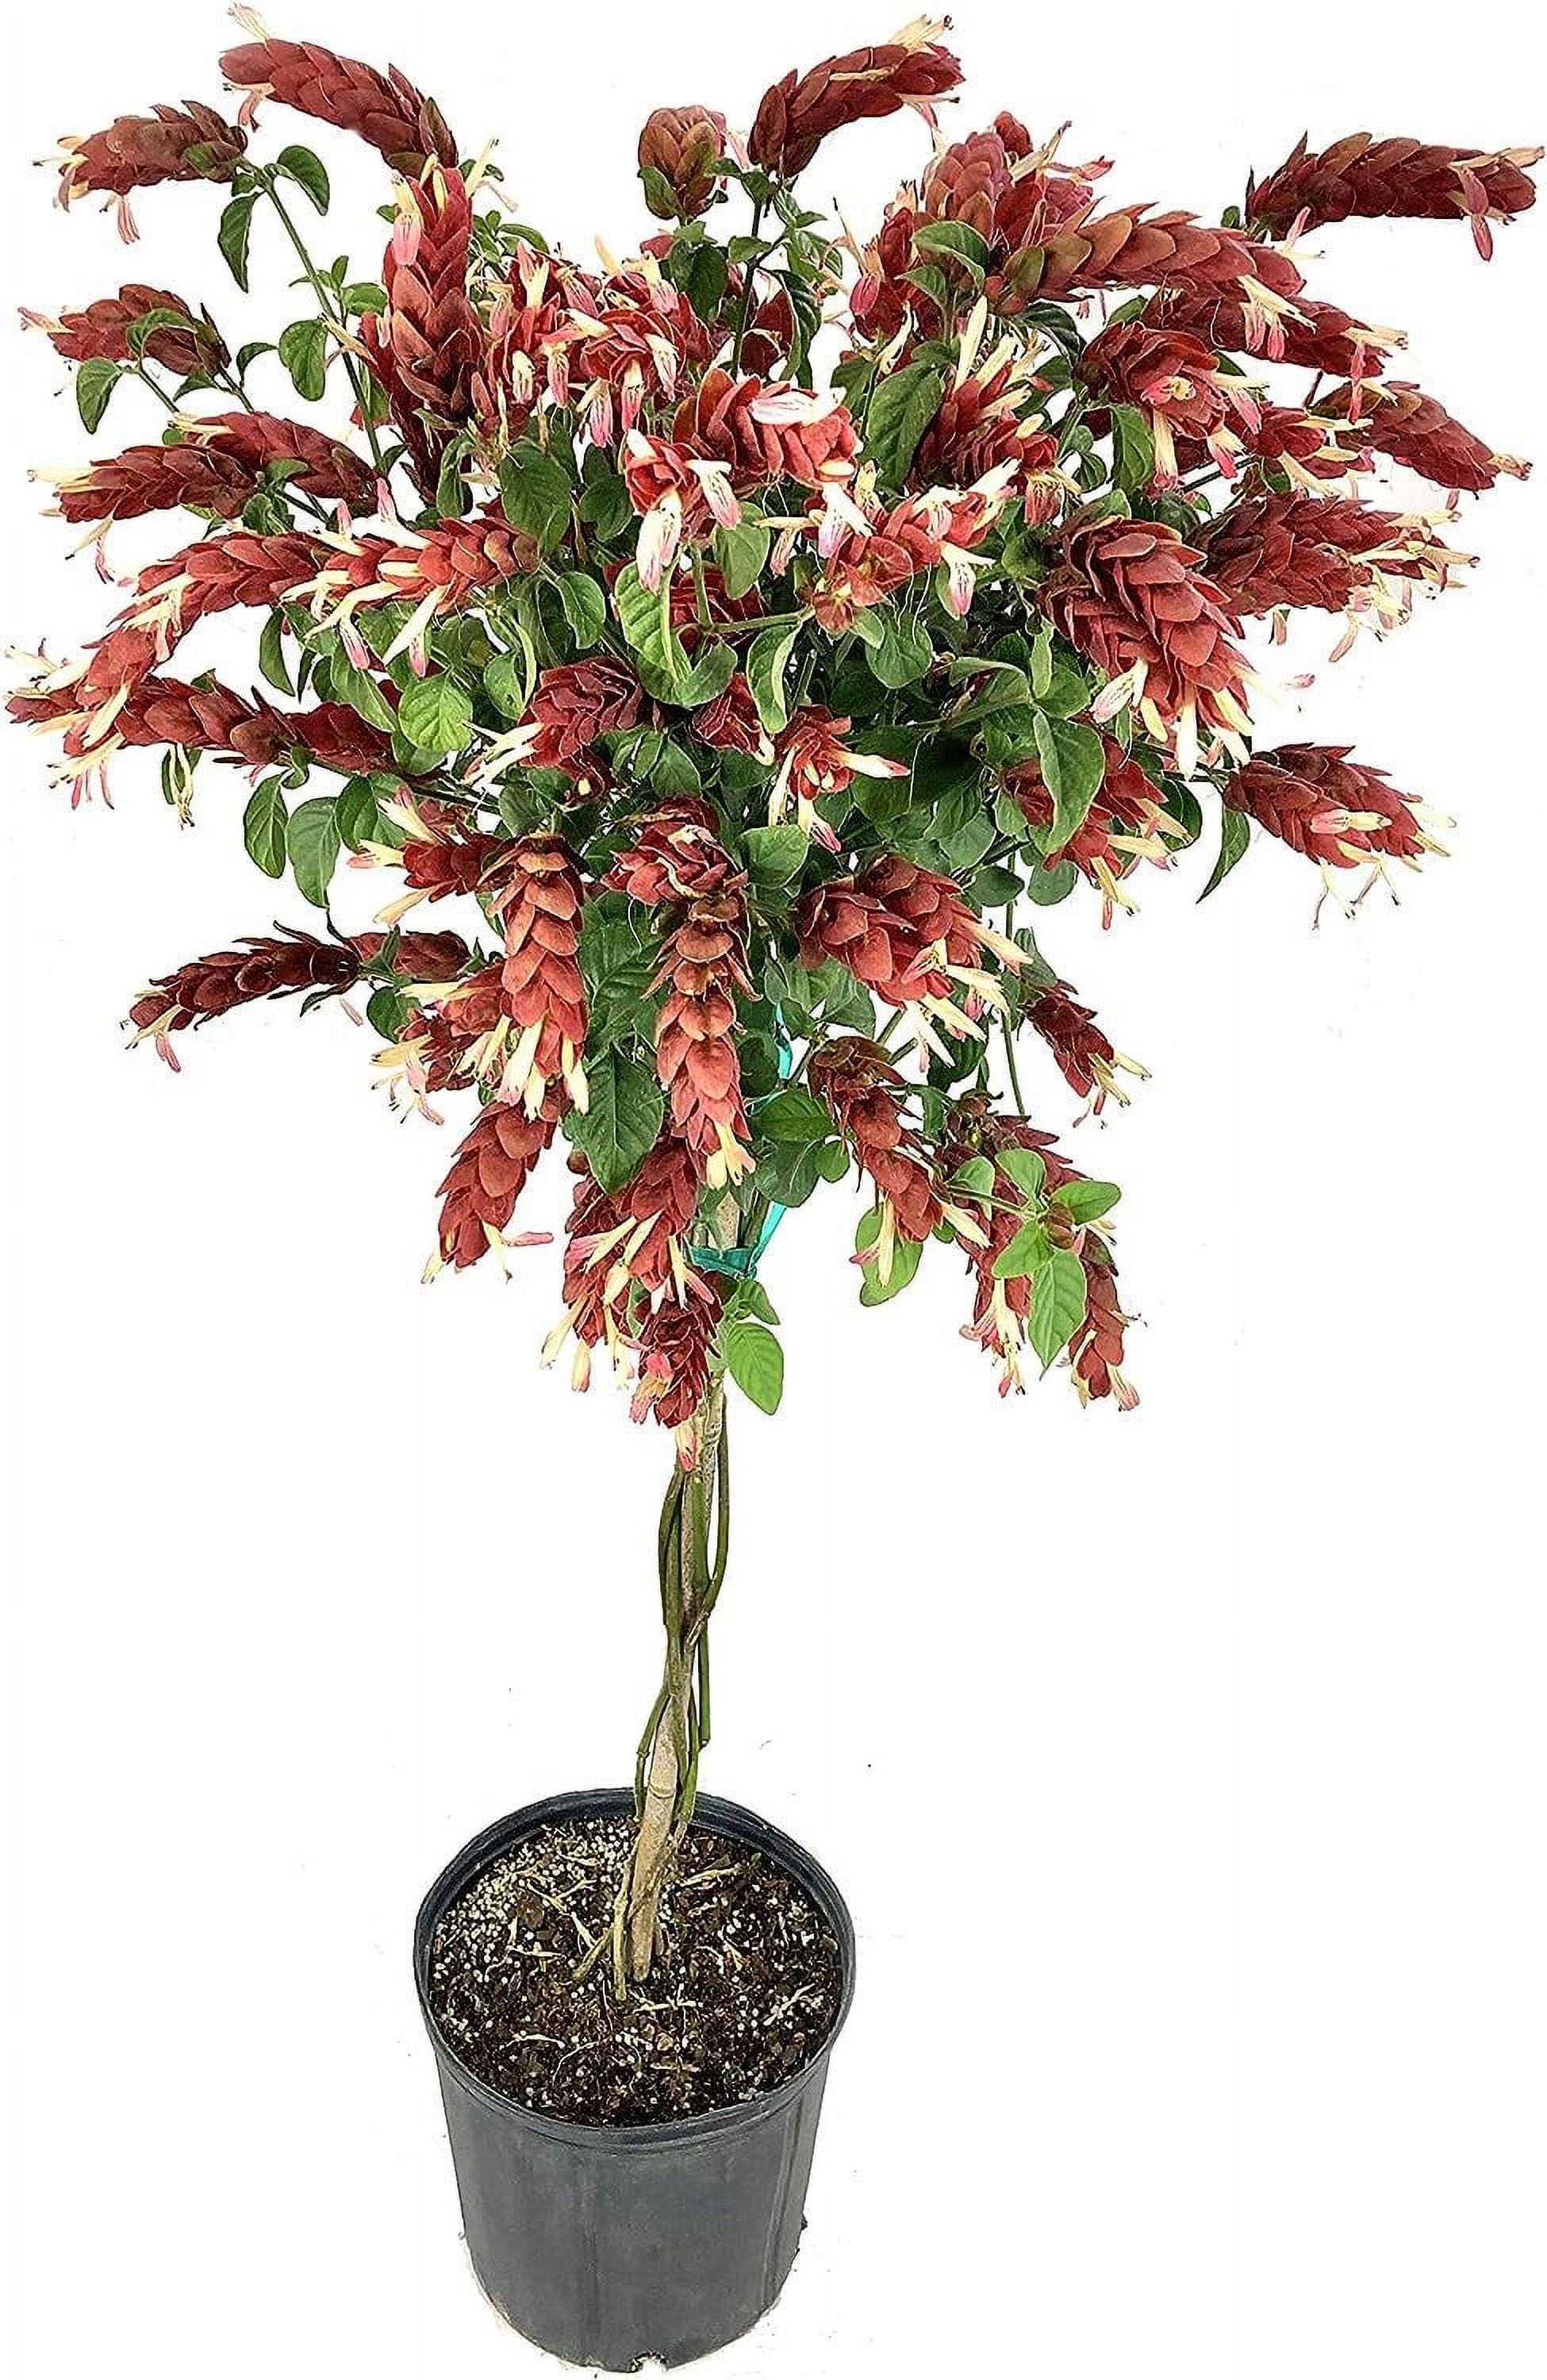 Shrimp Tree - Live Plant in a 10 Inch Growers Pot - Justicia Brandegeeana - Rare and Exotic Ornamental Flowering Tree - image 1 of 5